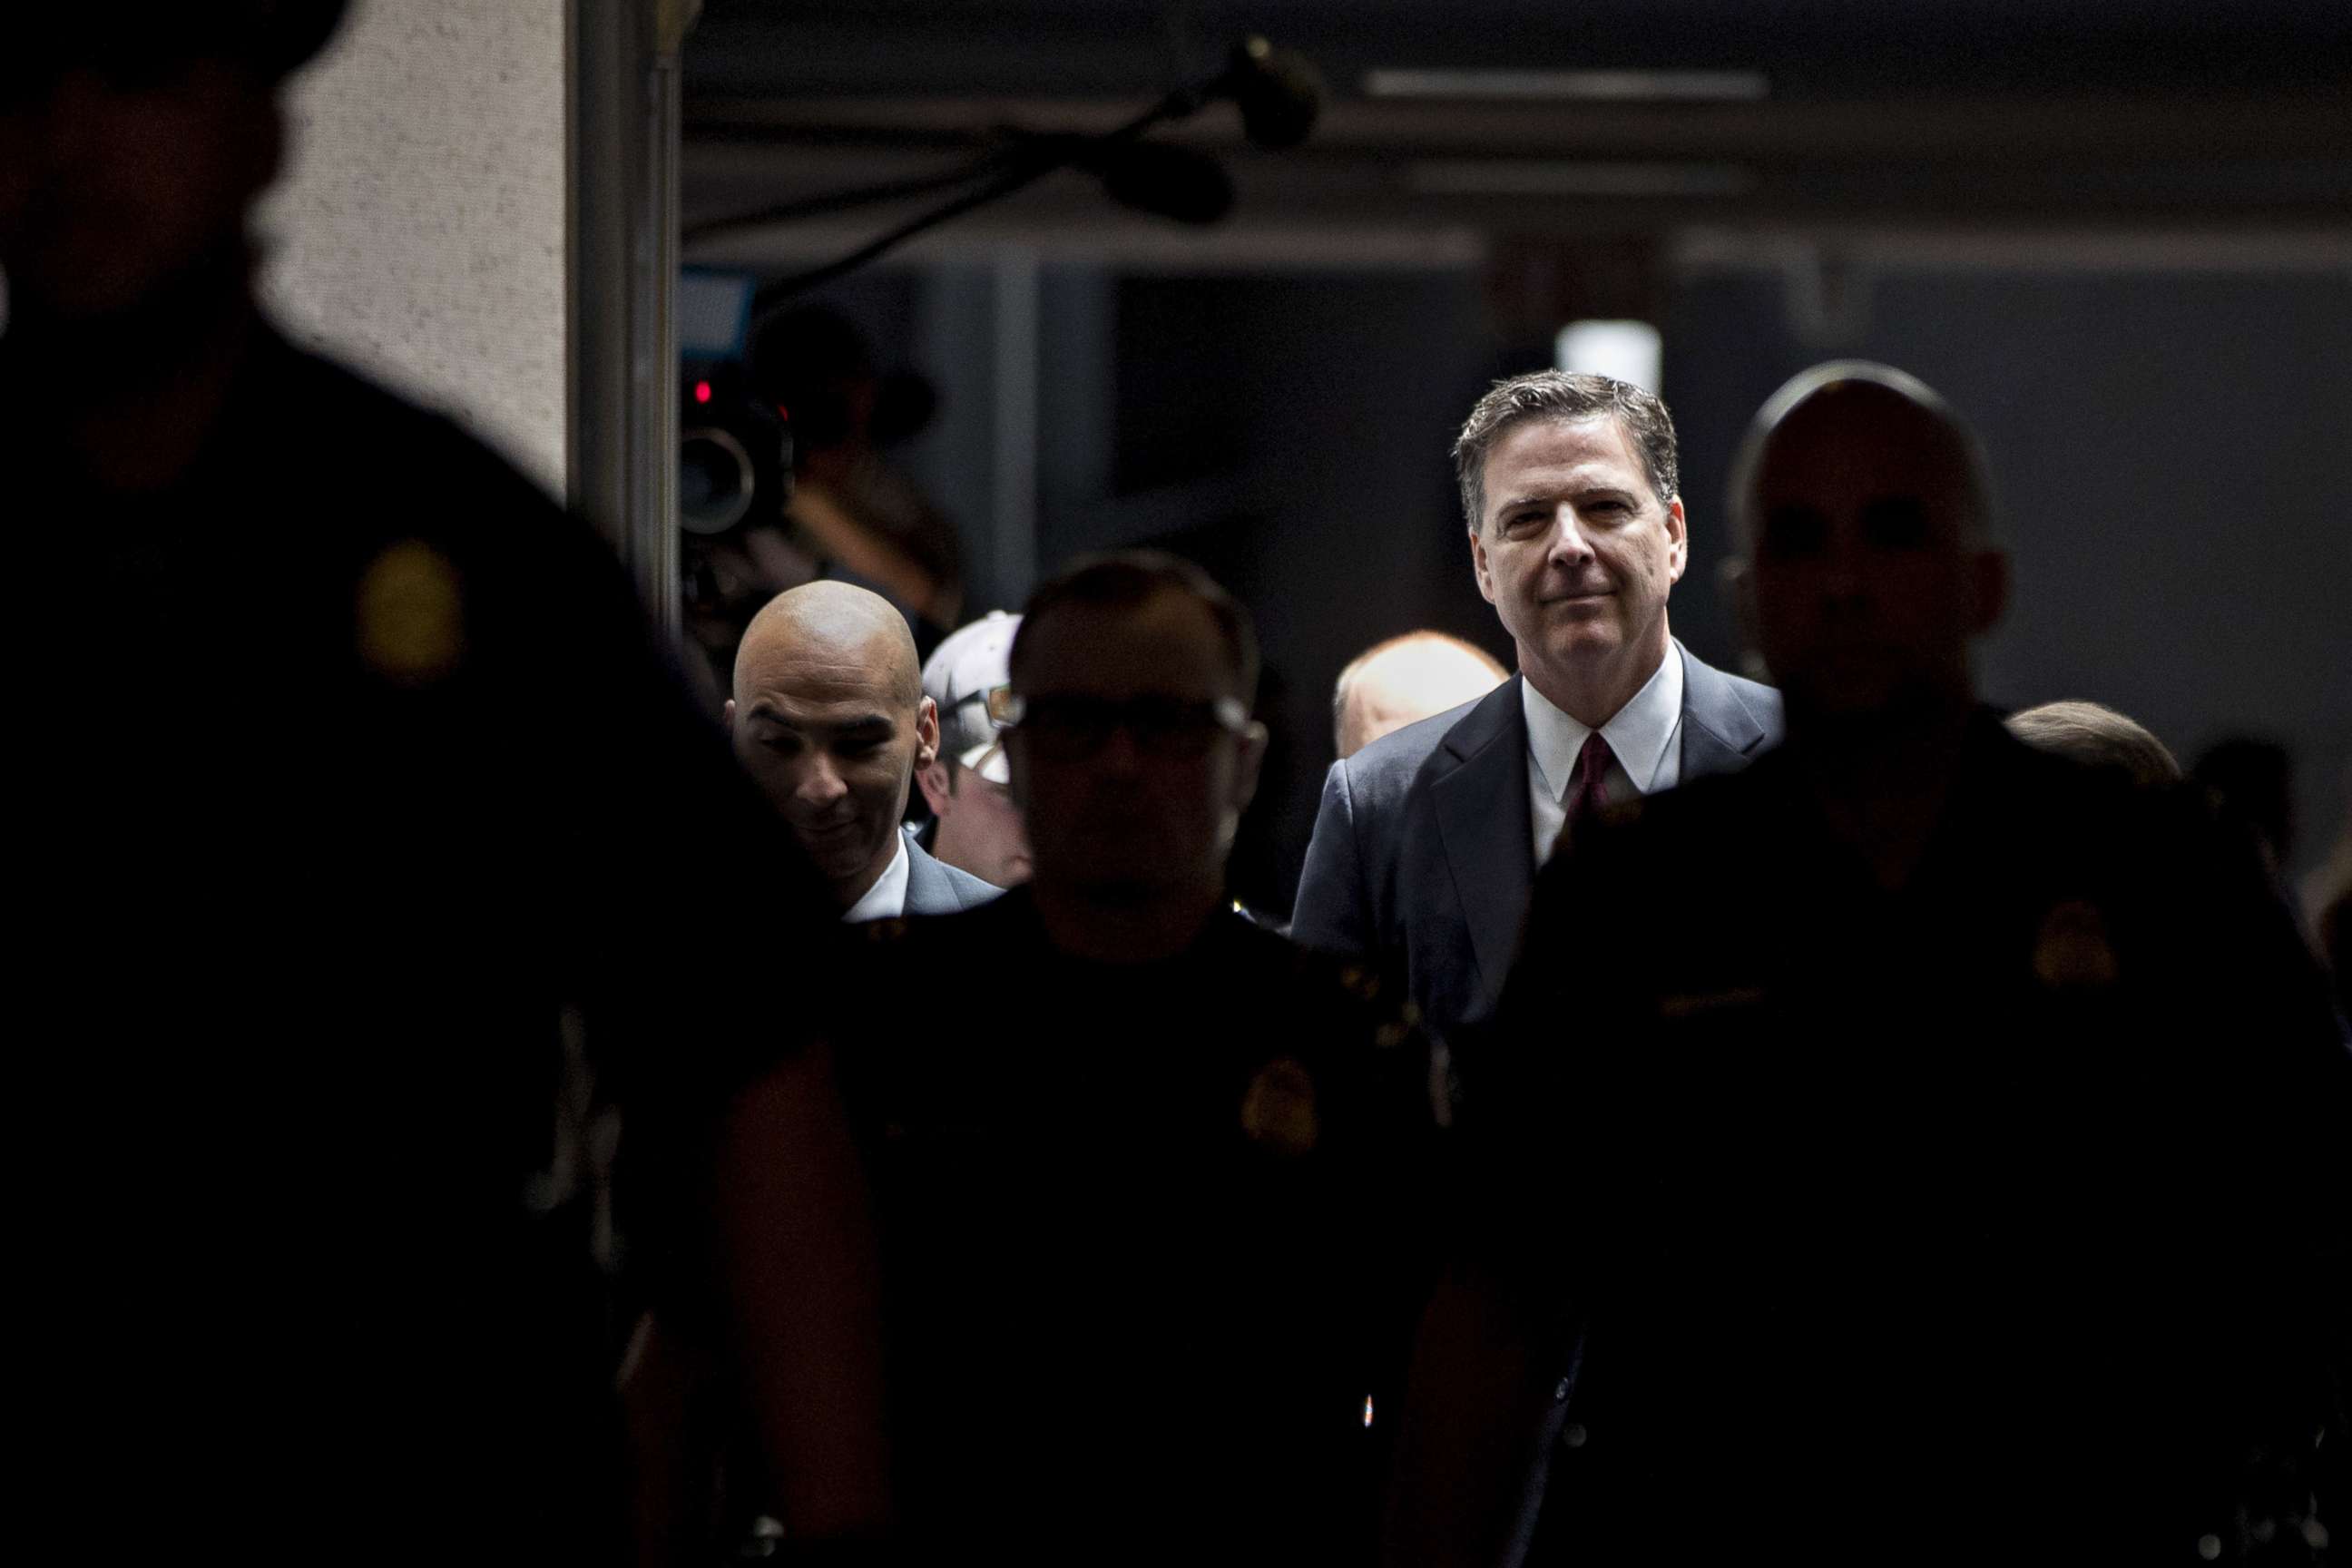 PHOTO: James Comey, former director of the Federal Bureau of Investigation (FBI), leaves a closed Senate Intelligence Committee briefing in Washington, D.C., June 8, 2017.